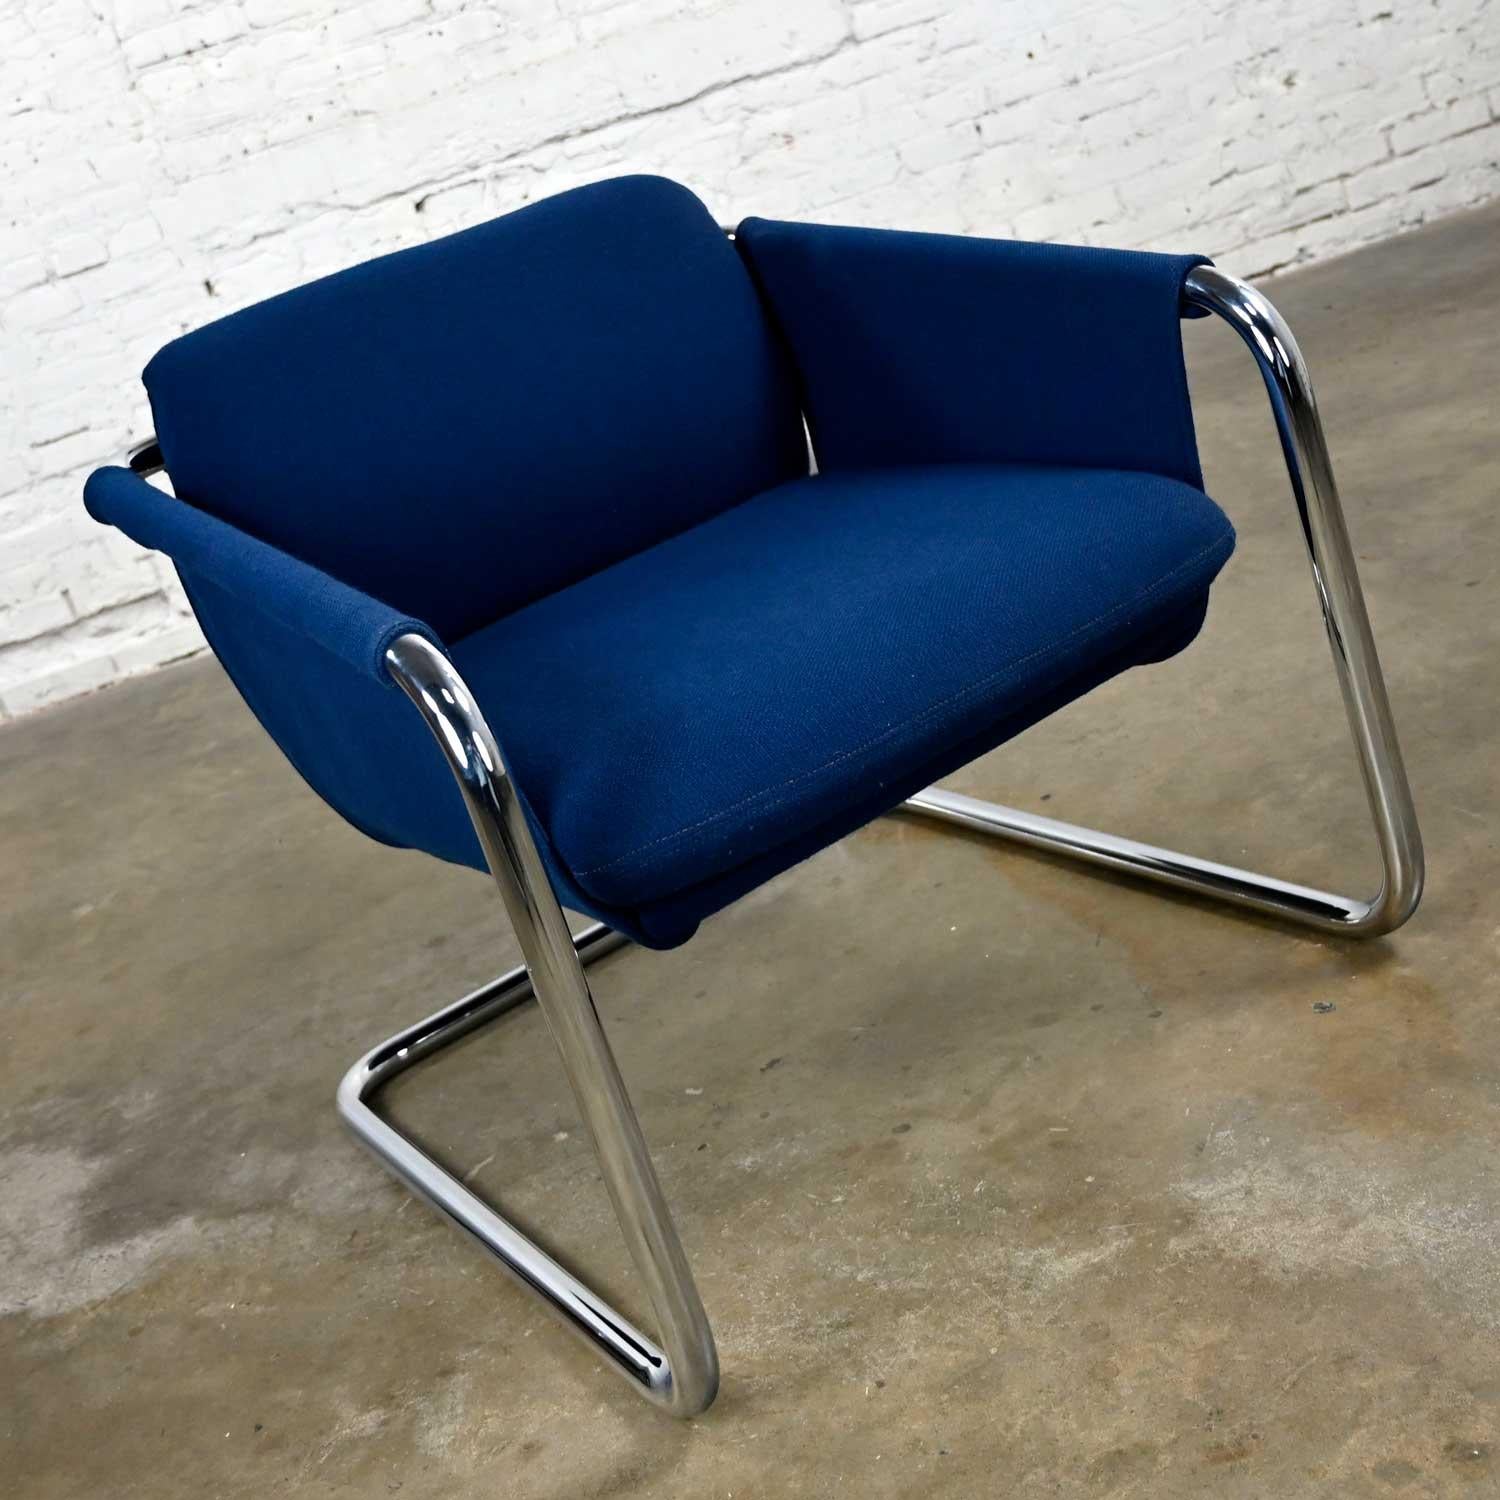 Fantastic vintage modern cantilever sling chair with original royal blue hopsacking fabric & chrome tube frame. Beautiful condition, keeping in mind that this is vintage and not new so will have signs of use and wear. It has been professionally